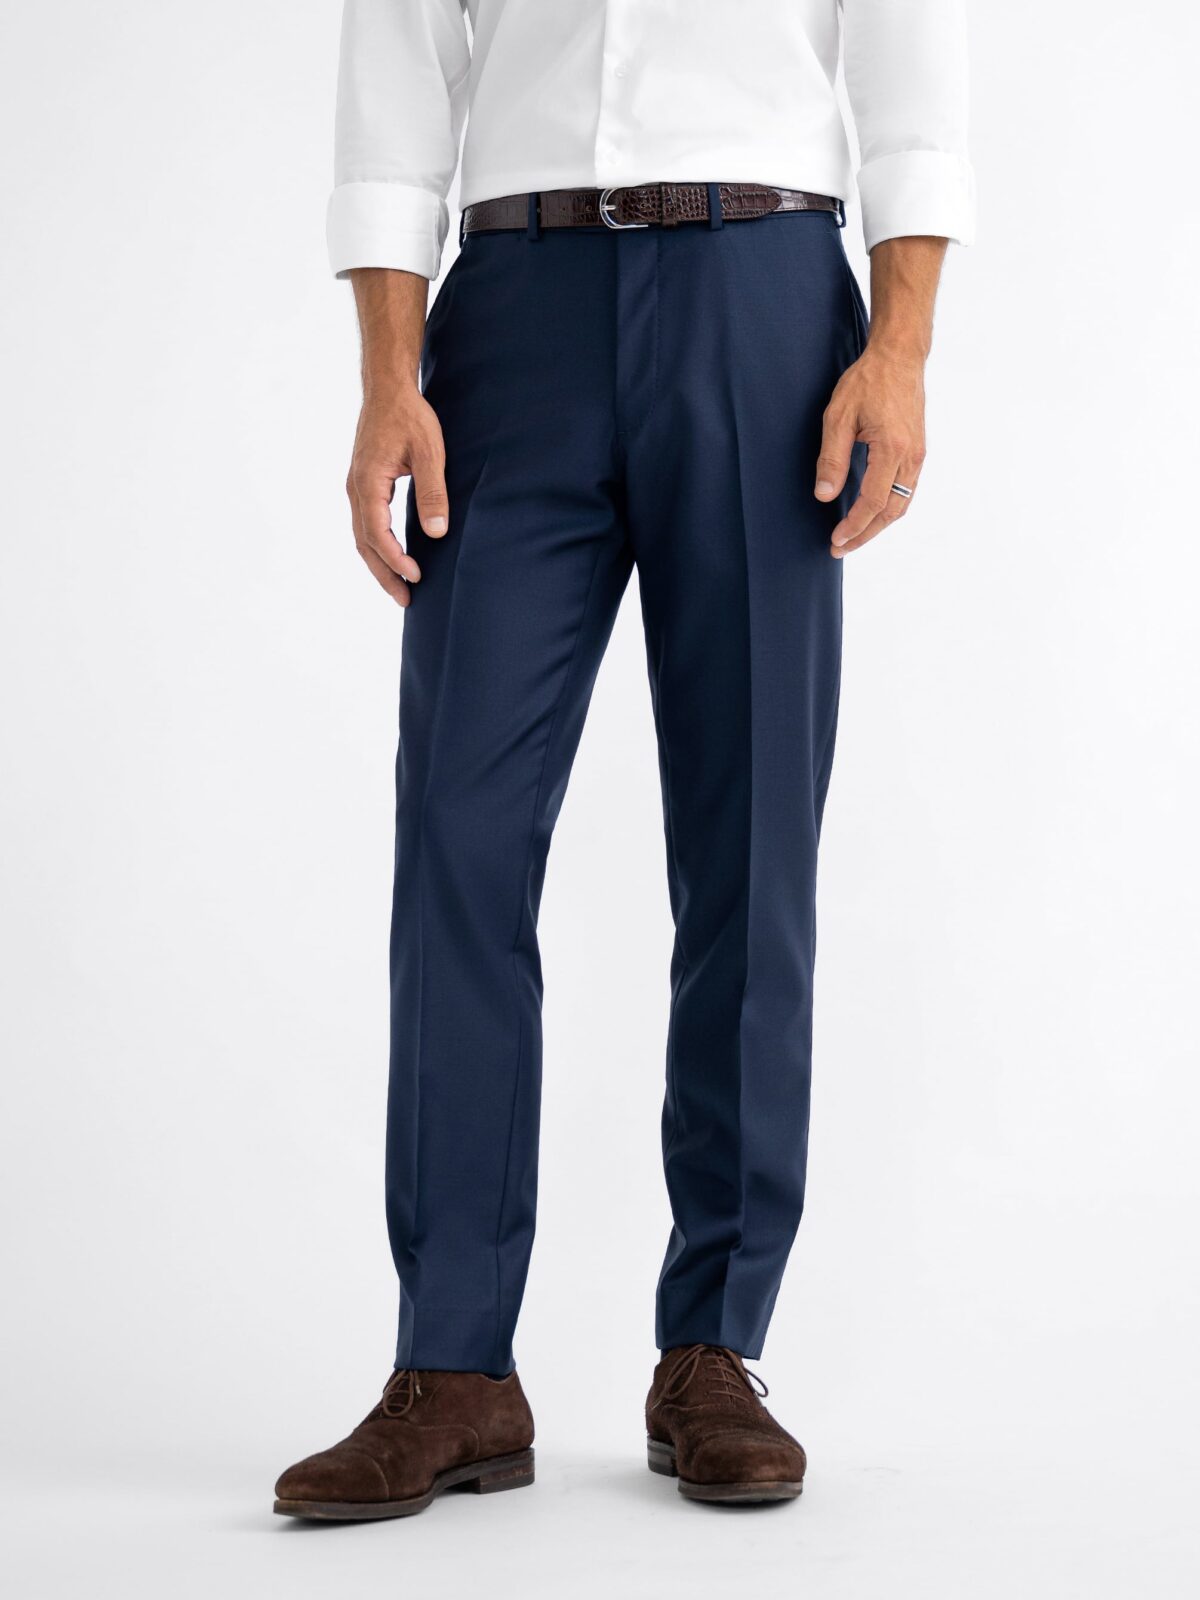 Classic Wool And Silk Blend Pants - Men - Ready-to-Wear